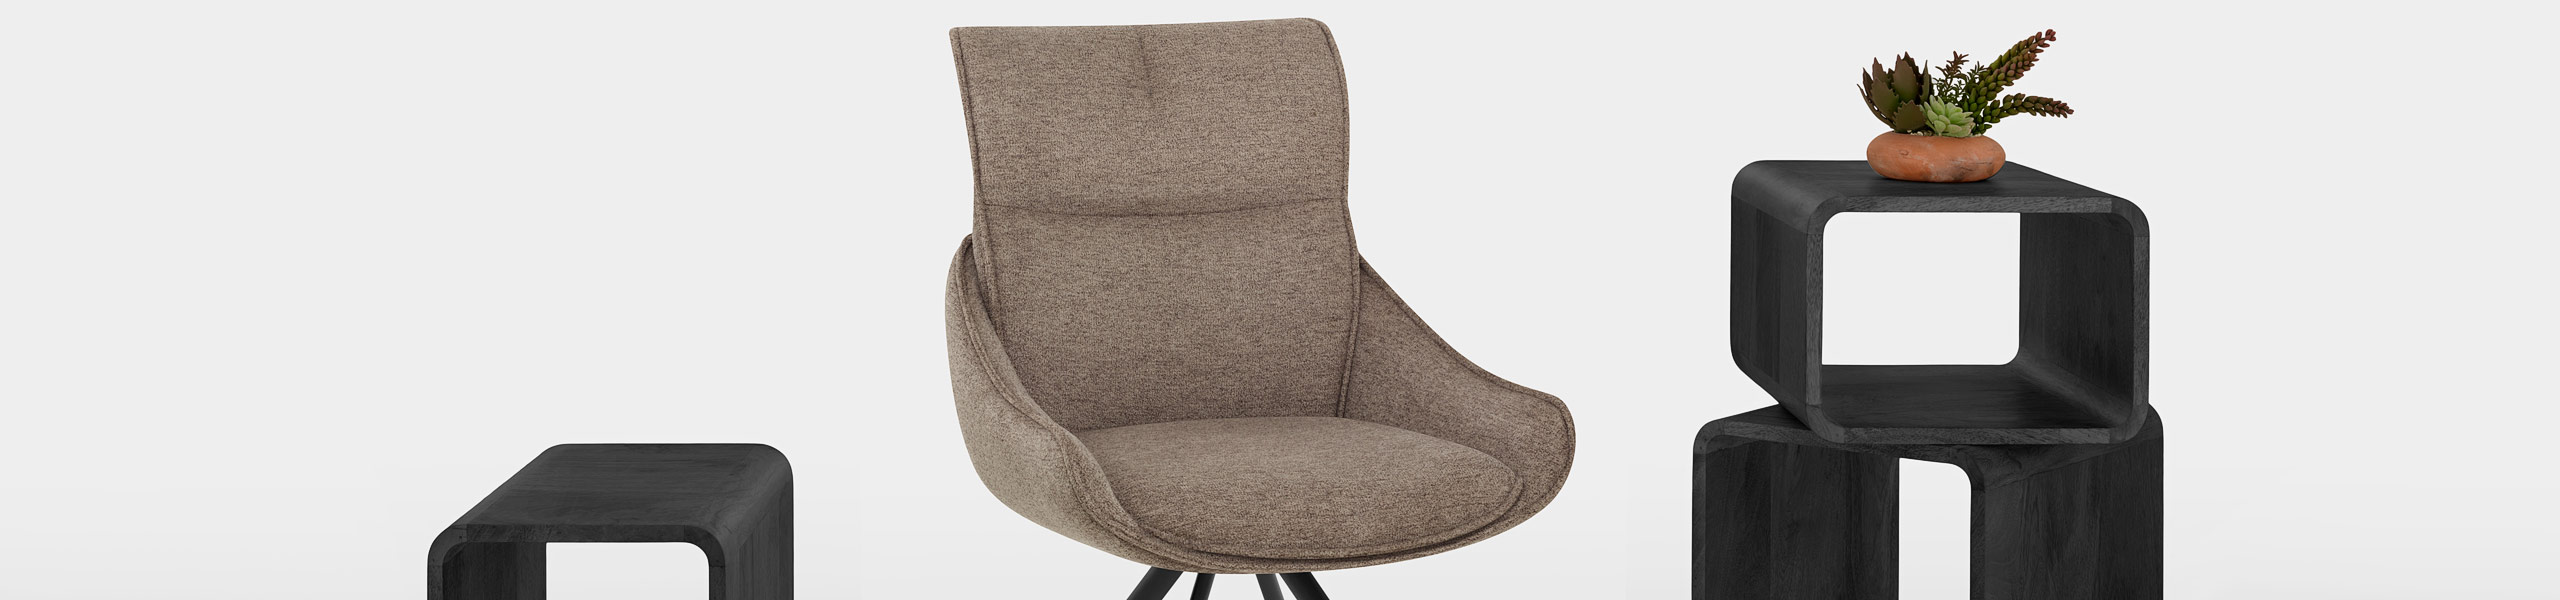 Creed Dining Chair Brown Fabric Video Banner